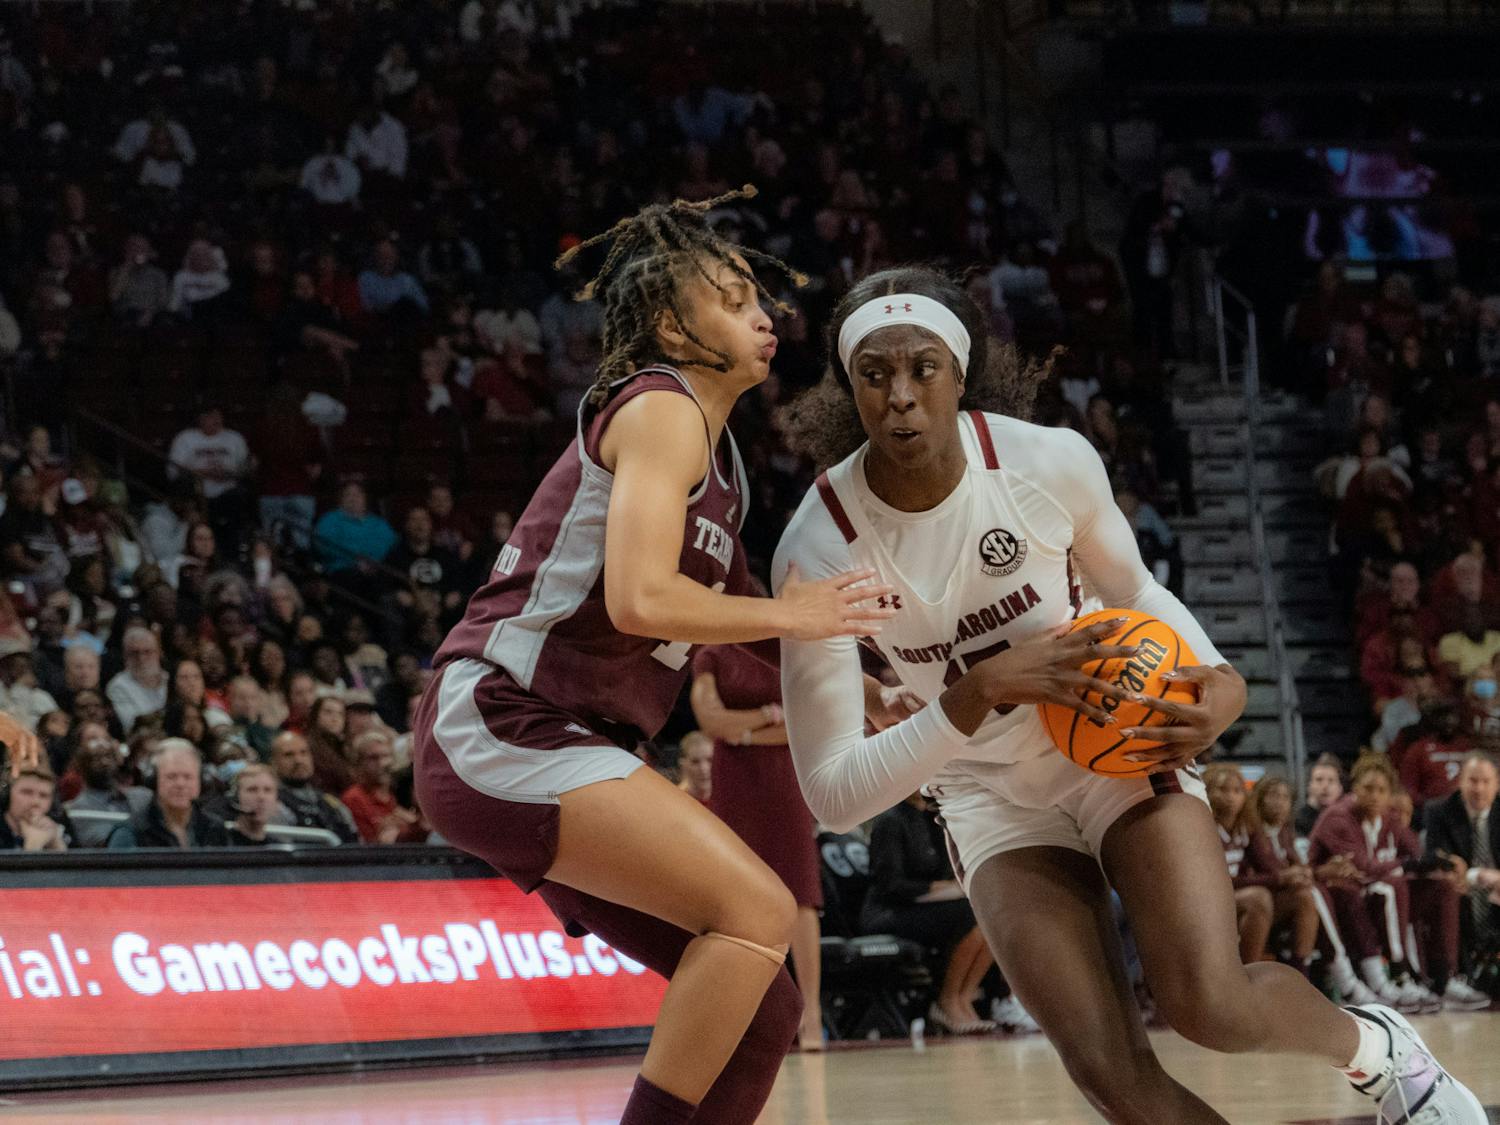 Senior forward Laeticia Amihere powers past a Texas A&amp;M player on her way to a basket during a Thursday night game on Dec. 29, 2022 at Colonial Life Arena. Amihere finished the game with 7 points.